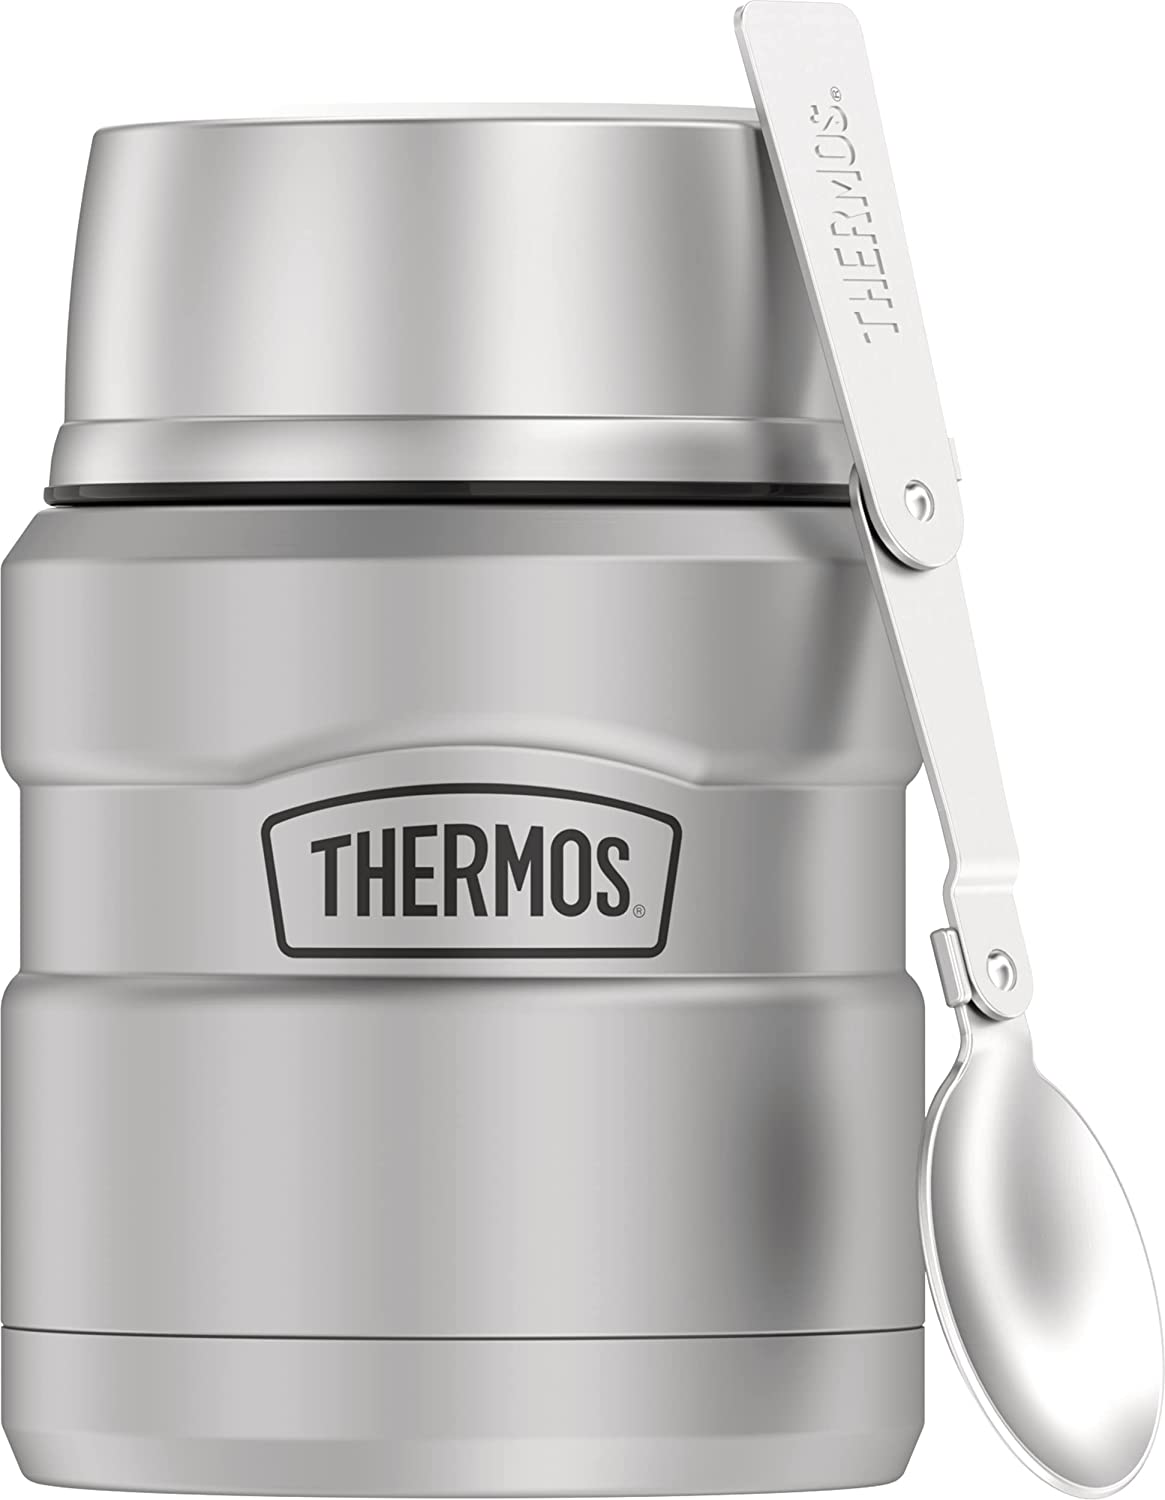 https://www.dontwasteyourmoney.com/wp-content/uploads/2020/06/thermos-stainless-king-soup-thermos-16-ounce-1.jpg